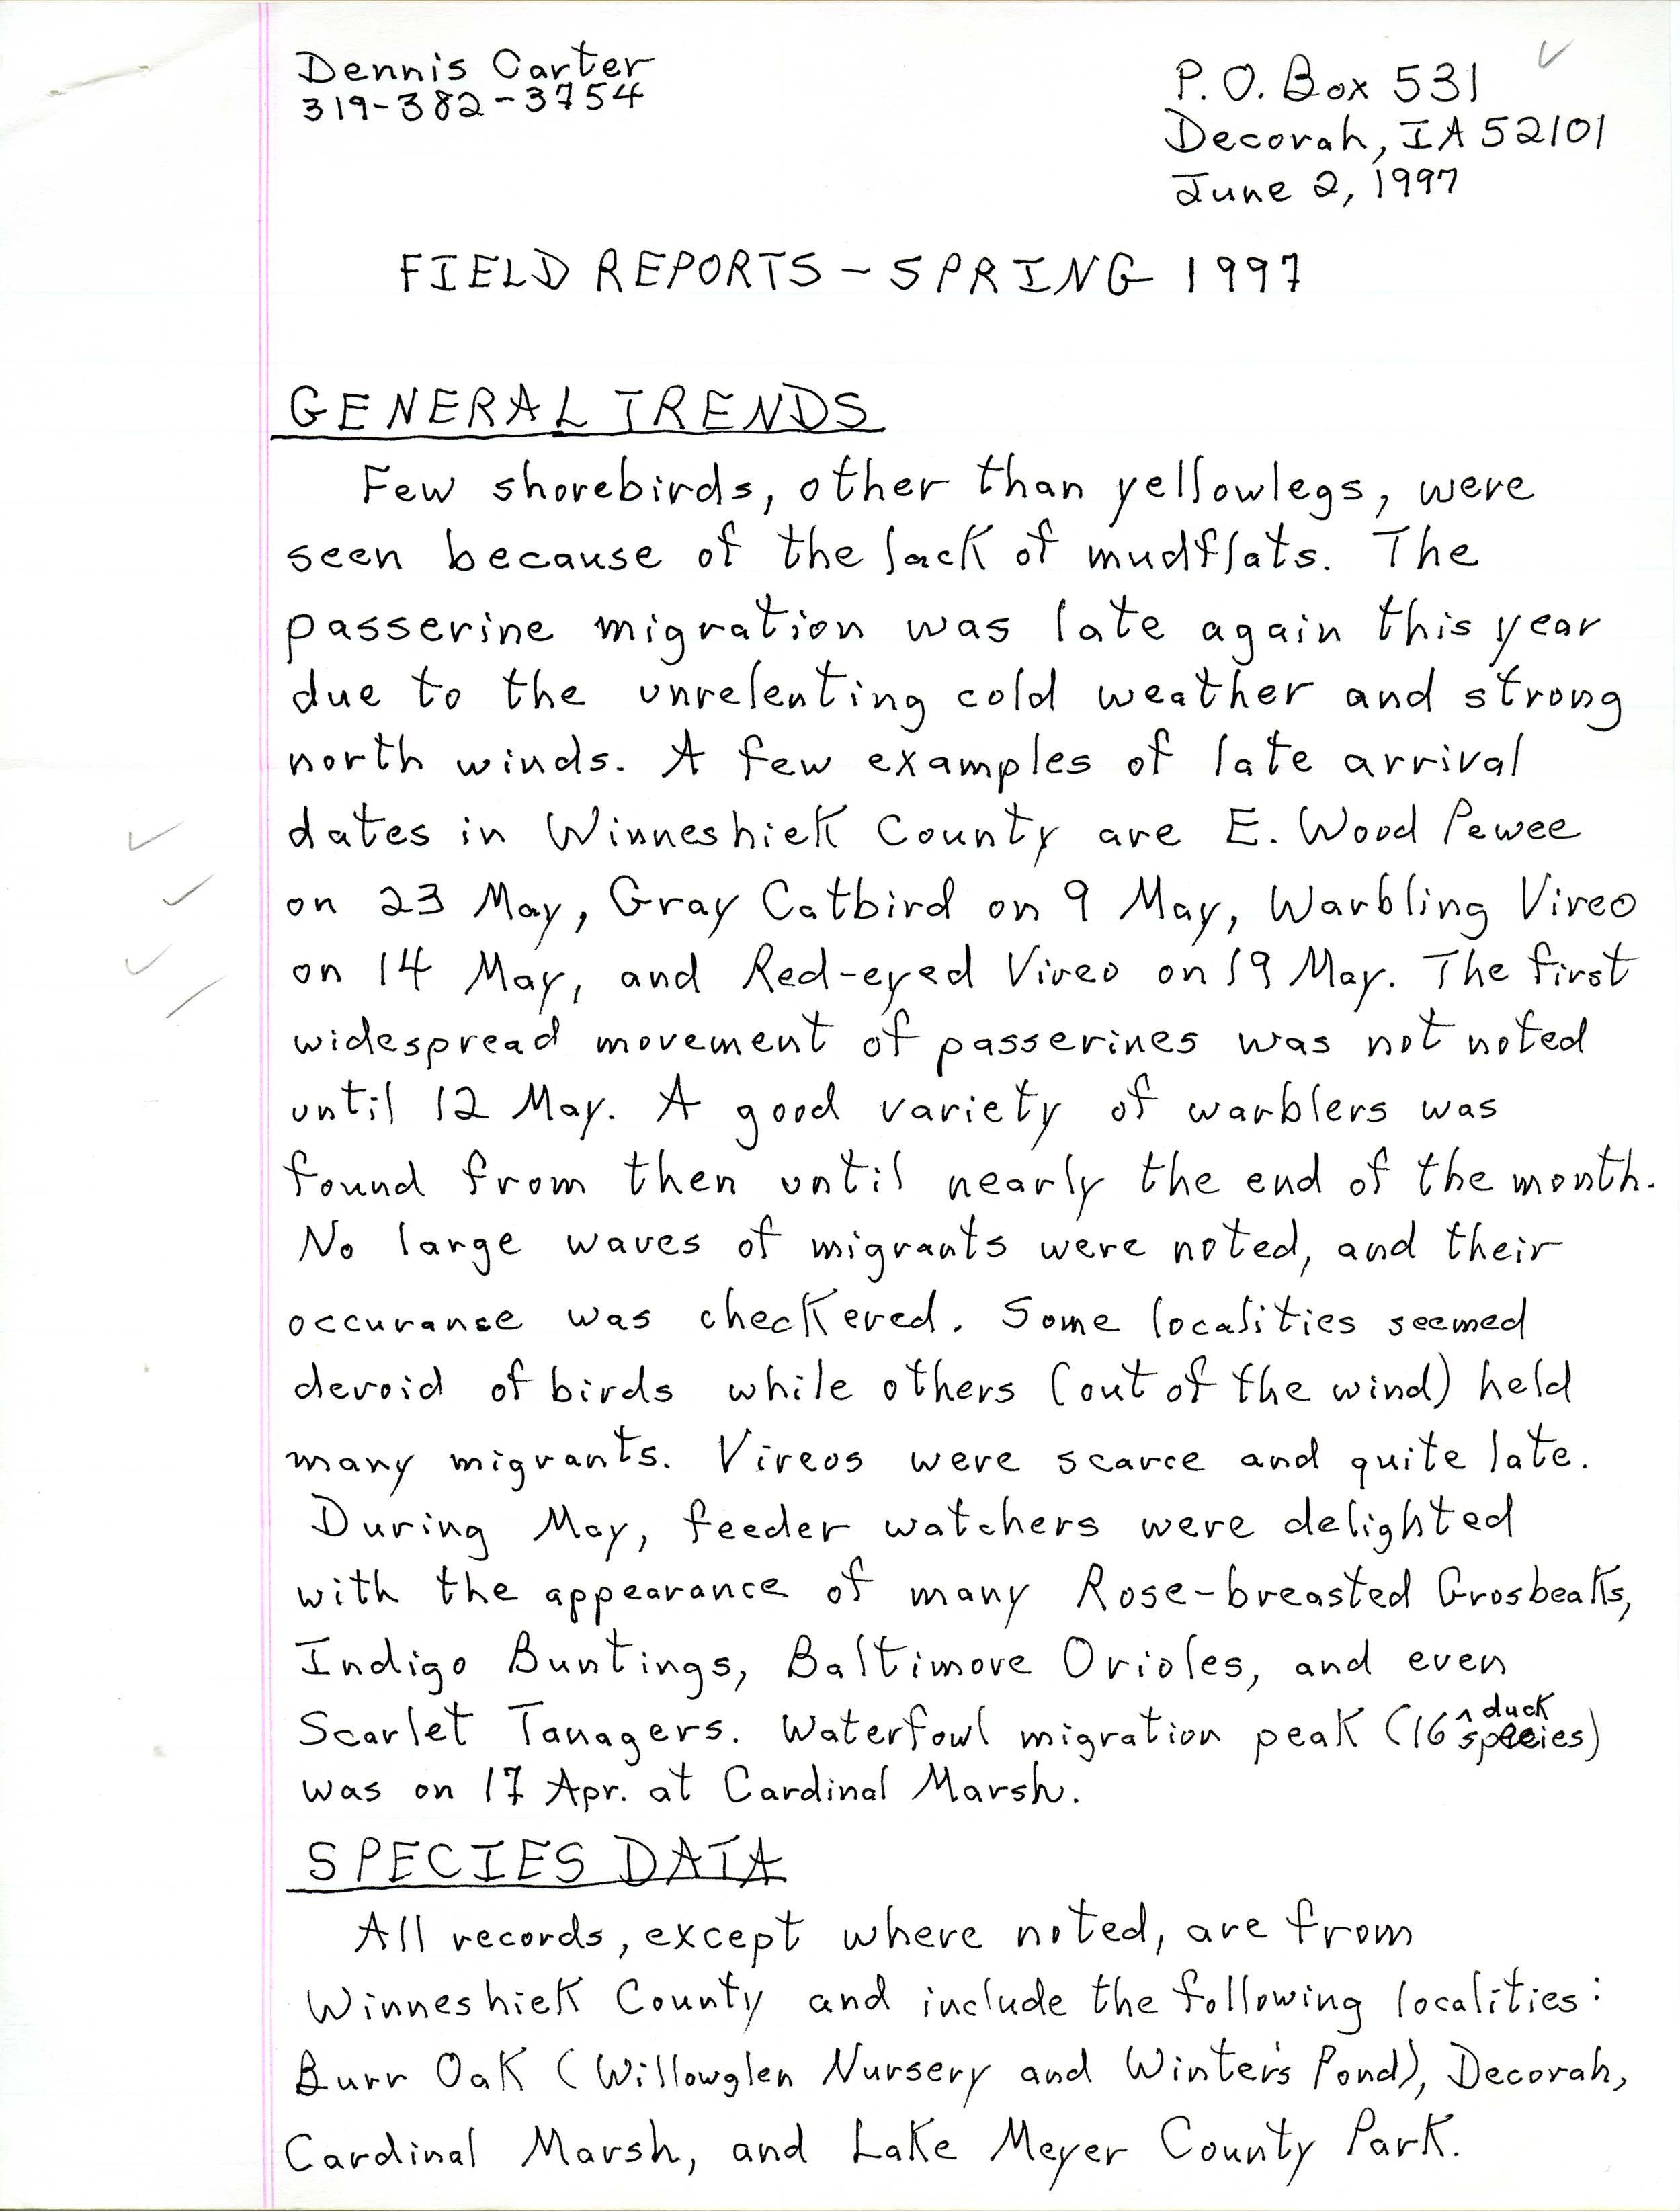 Field notes contributed by Dennis L. Carter, June 2, 1997